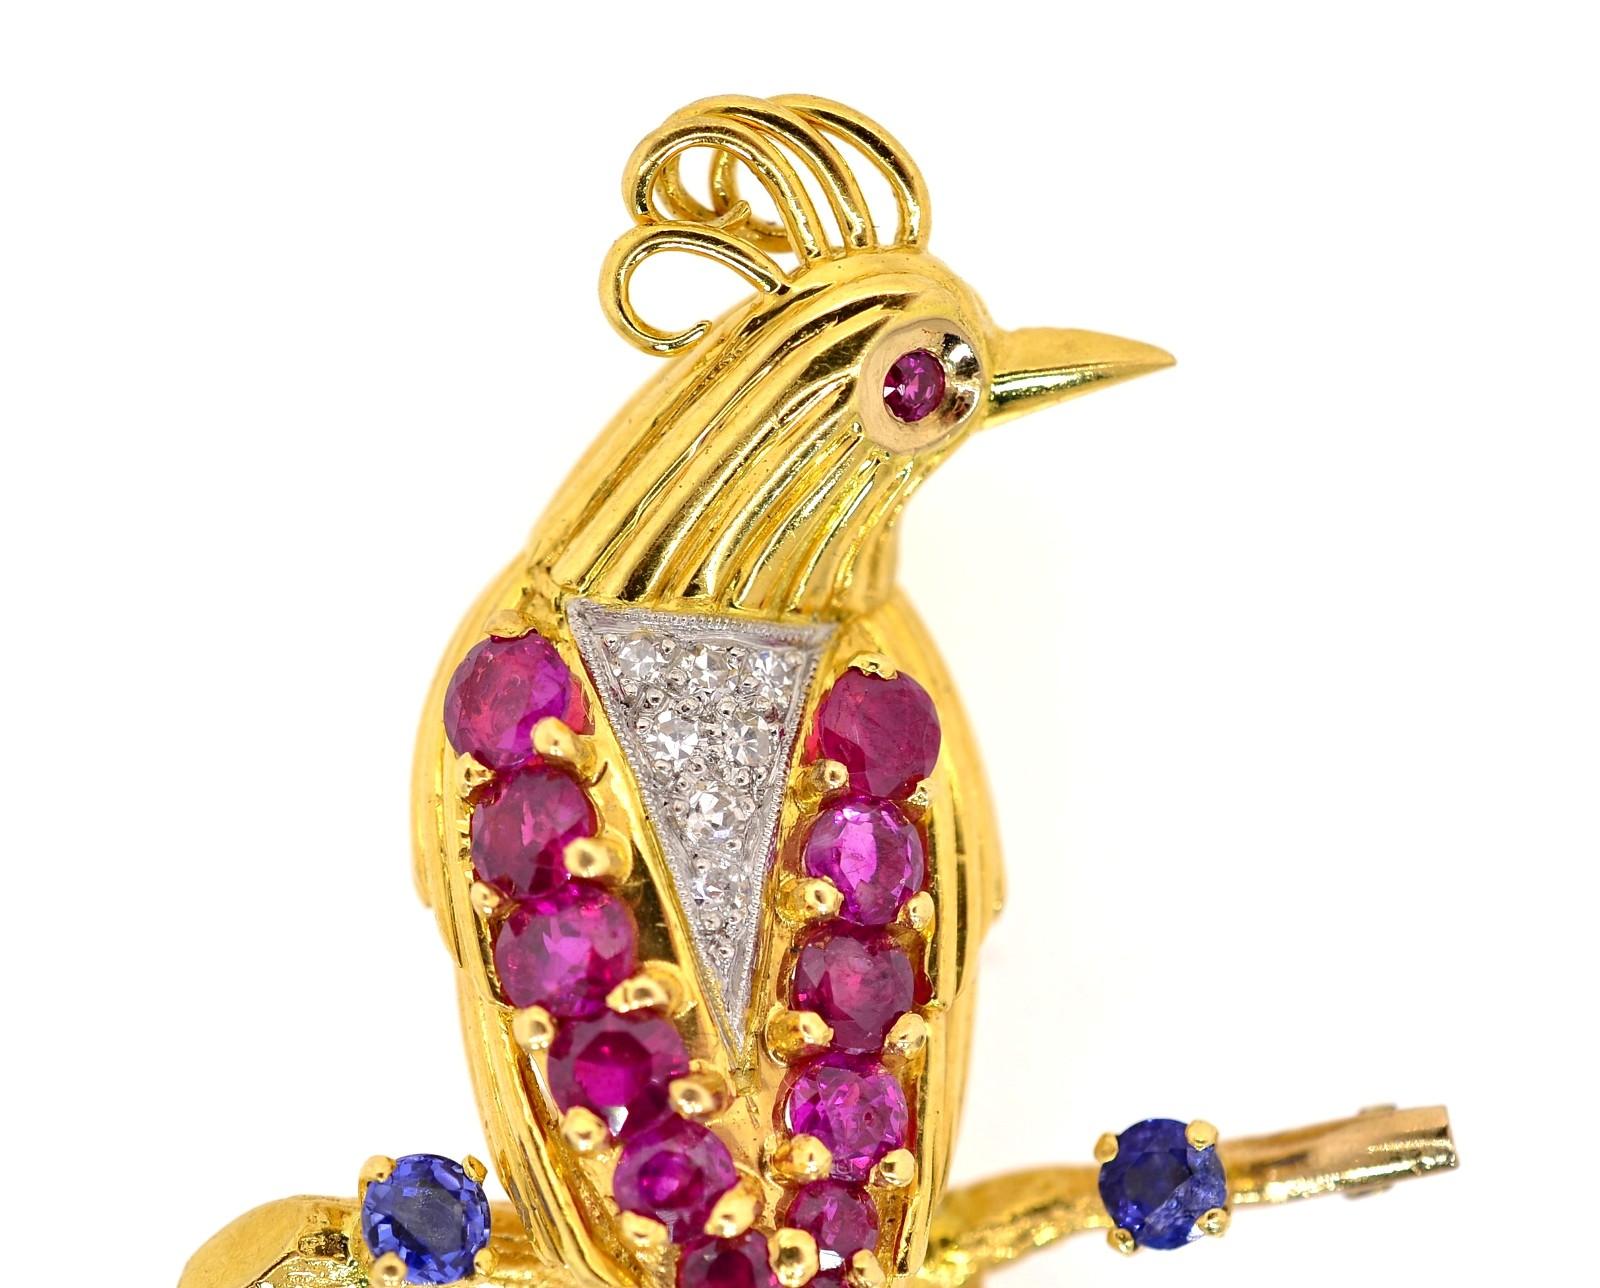 This bright and alluring bird of paradise brooch is vintage 1970s. Crafted of 18K yellow gold, it's feathers feature approx. 2.50 carat of radiant Burma Rubies along with diamond accents. Two blue Ceylon Sapphires accent the branch on which this